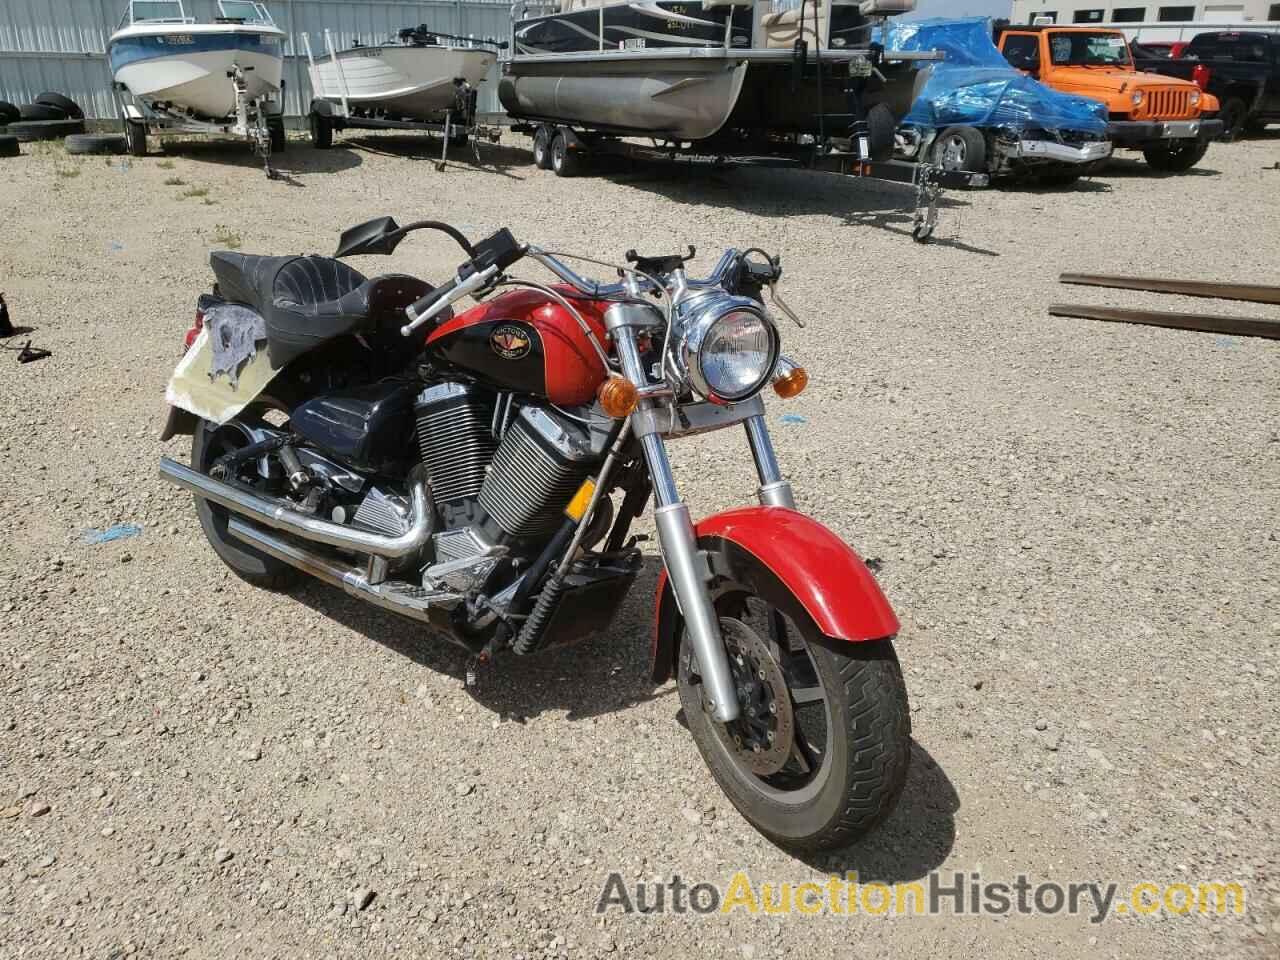 2000 VICTORY MOTORCYCLES V92 C VICT C VICTORY, 5VPCB15DXY3001984